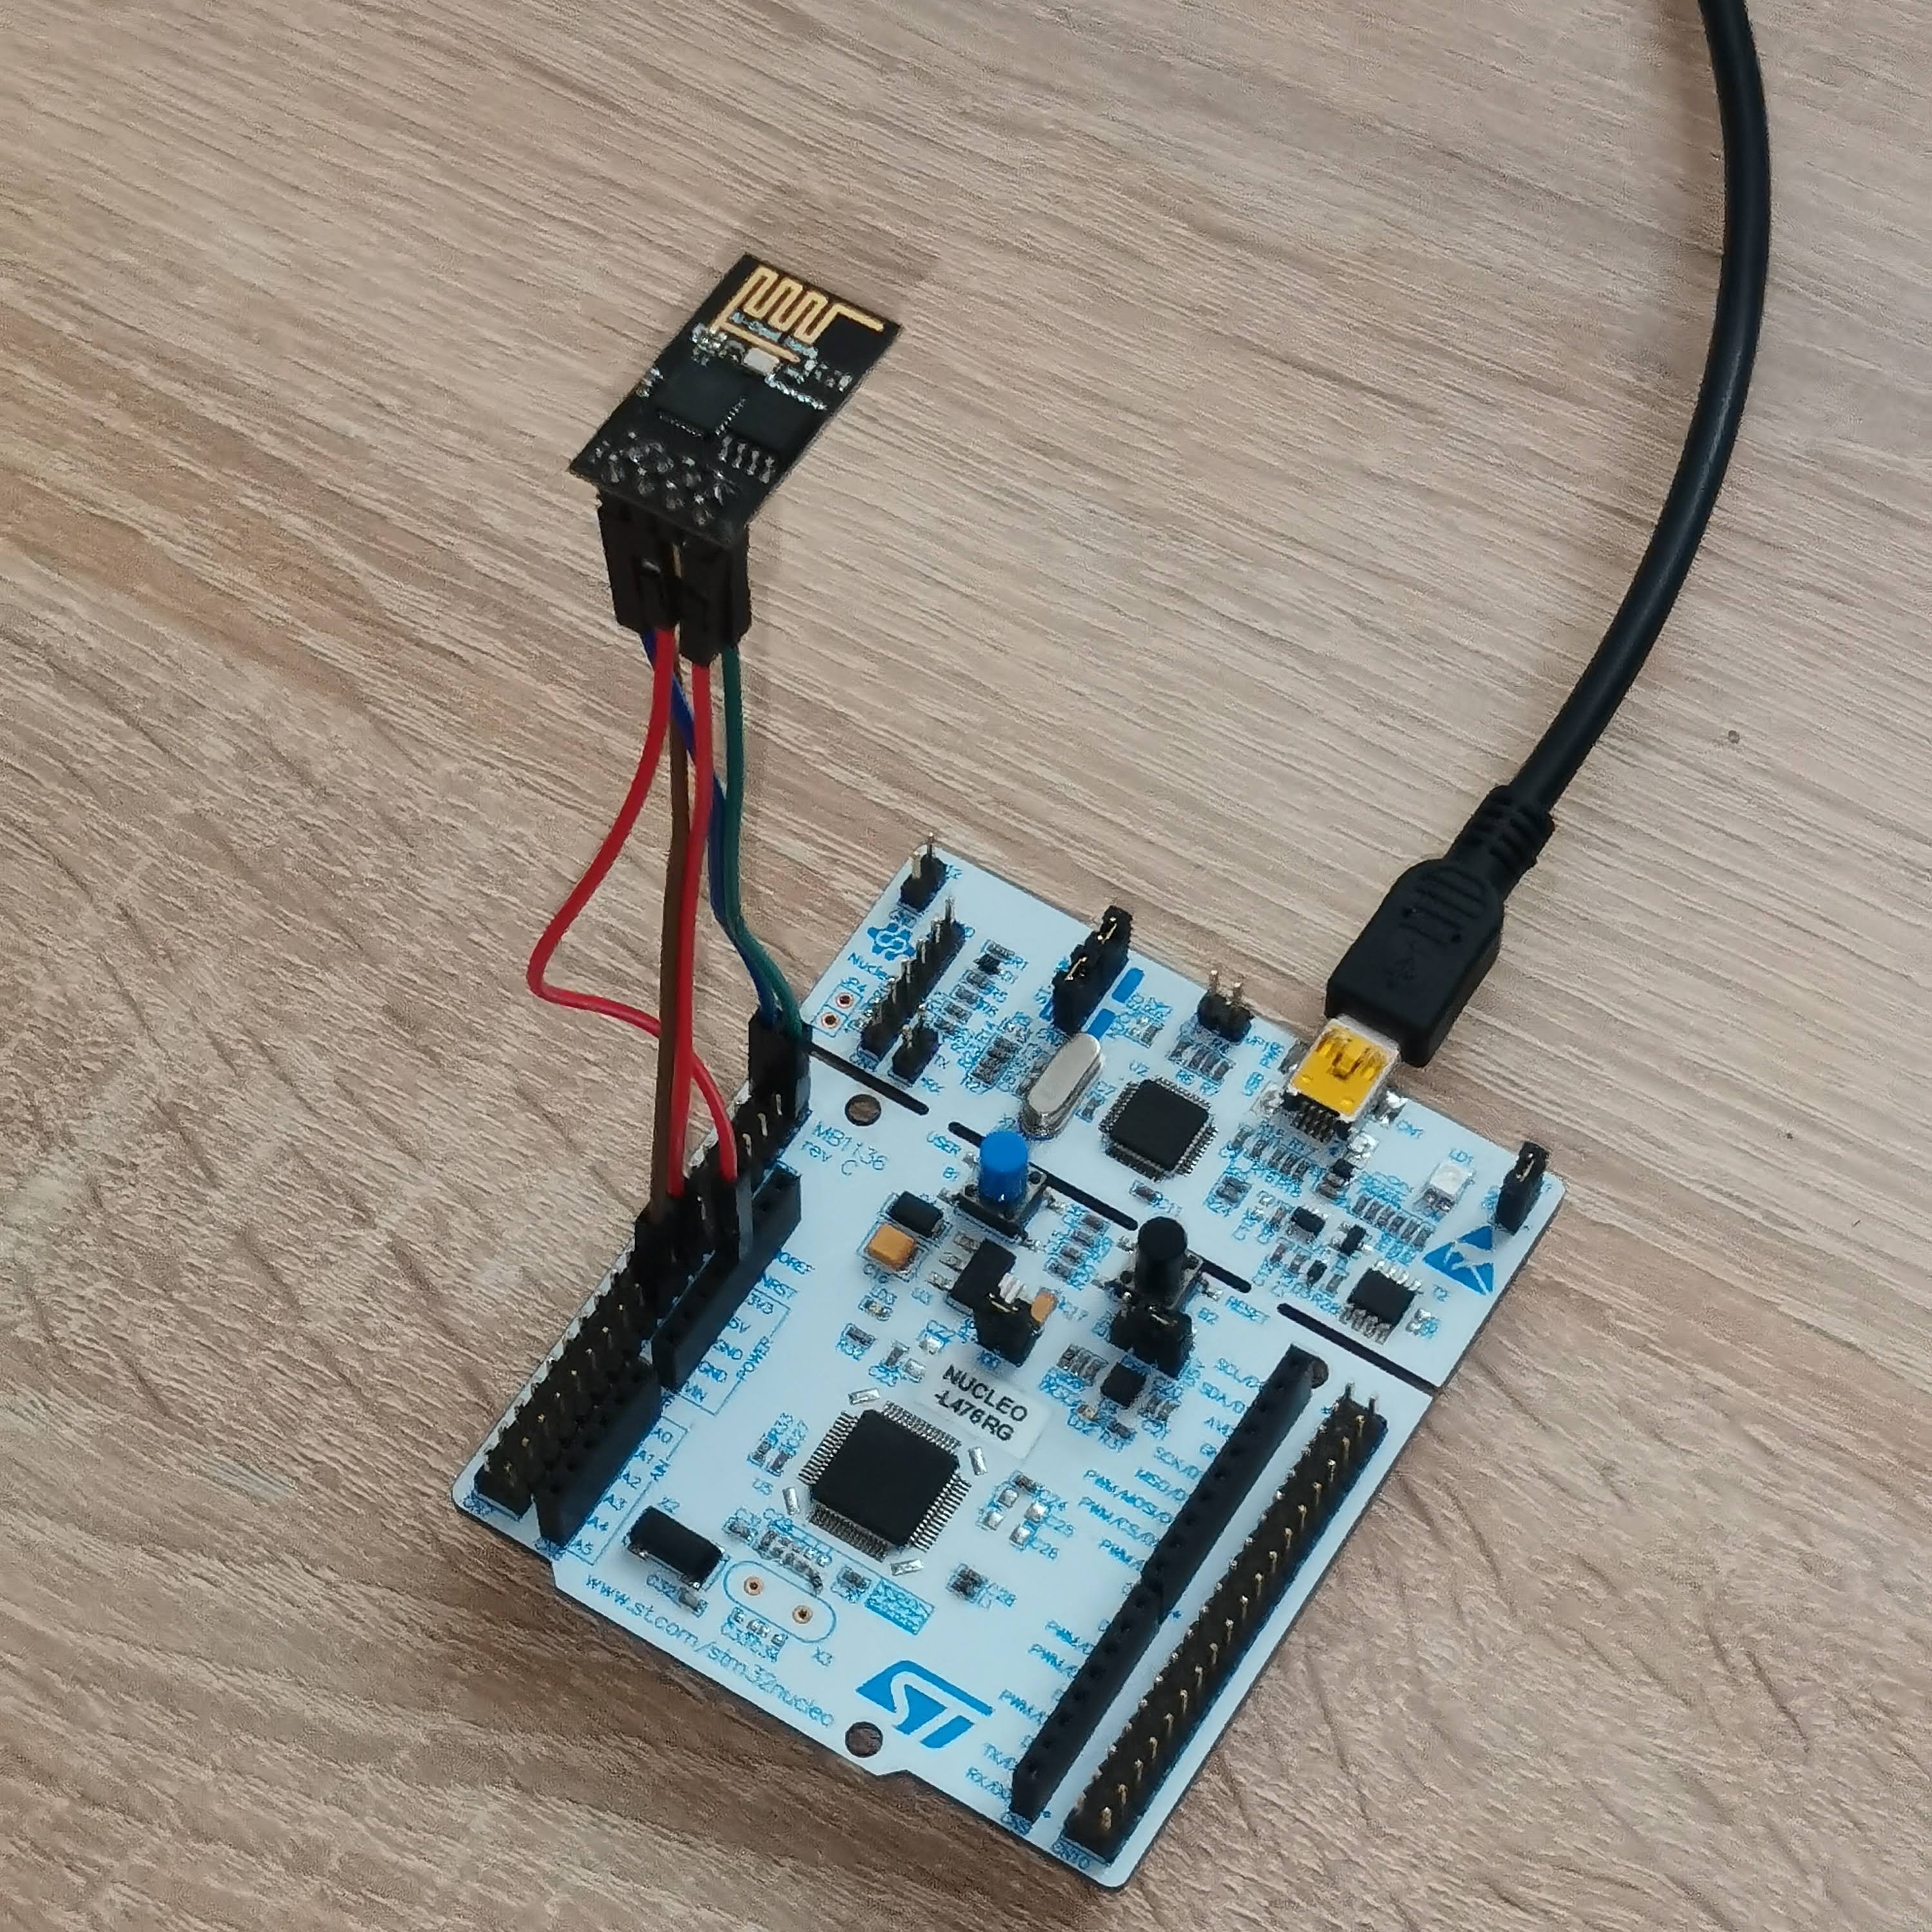 ESP8266 to STM32 connection photo